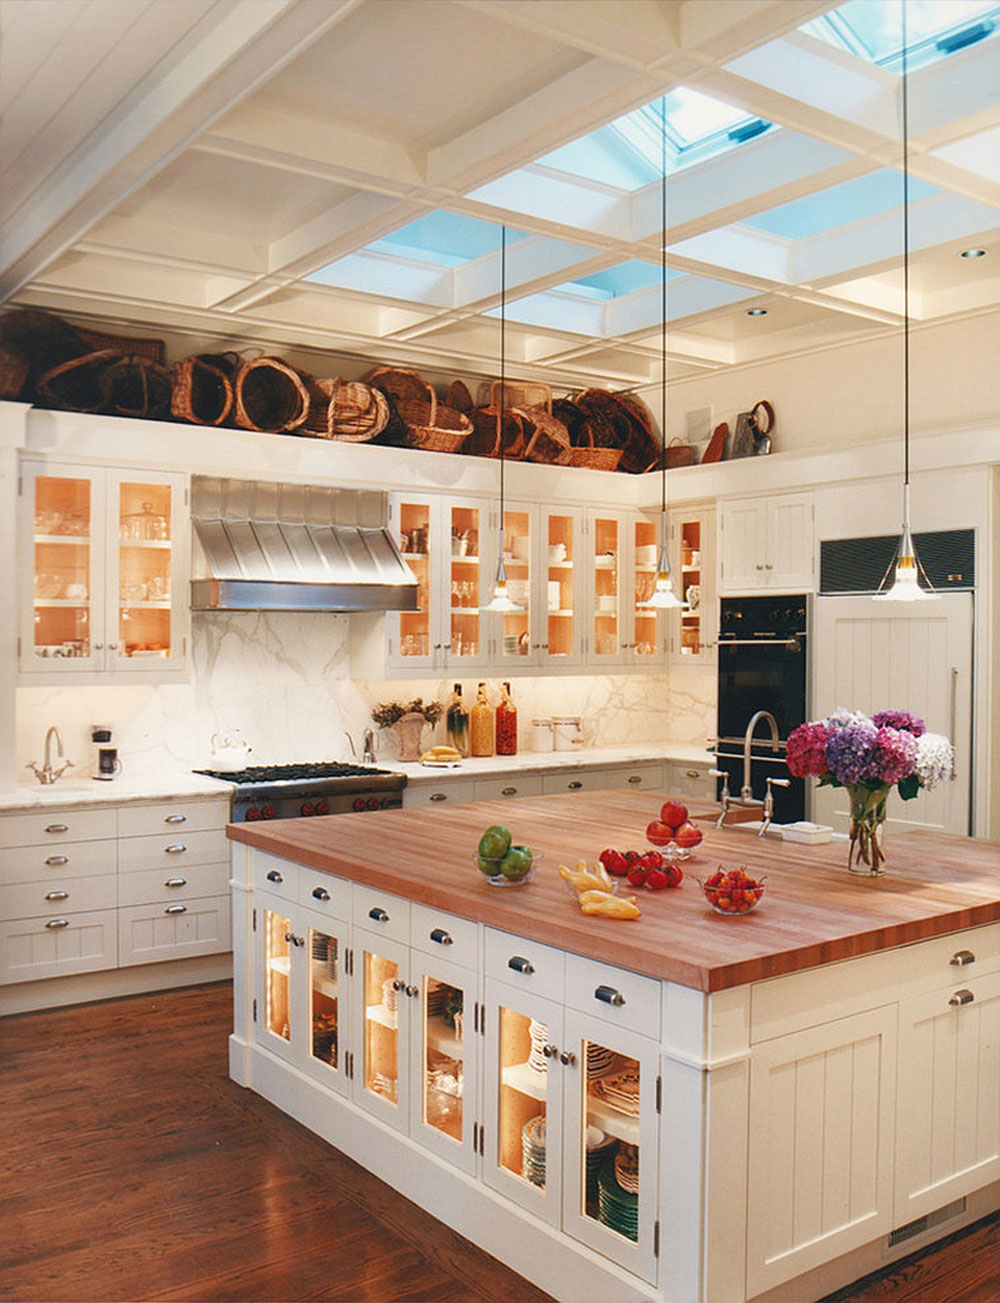 Kitchens with skylights for more natural light 5 kitchens with skylights for more natural light